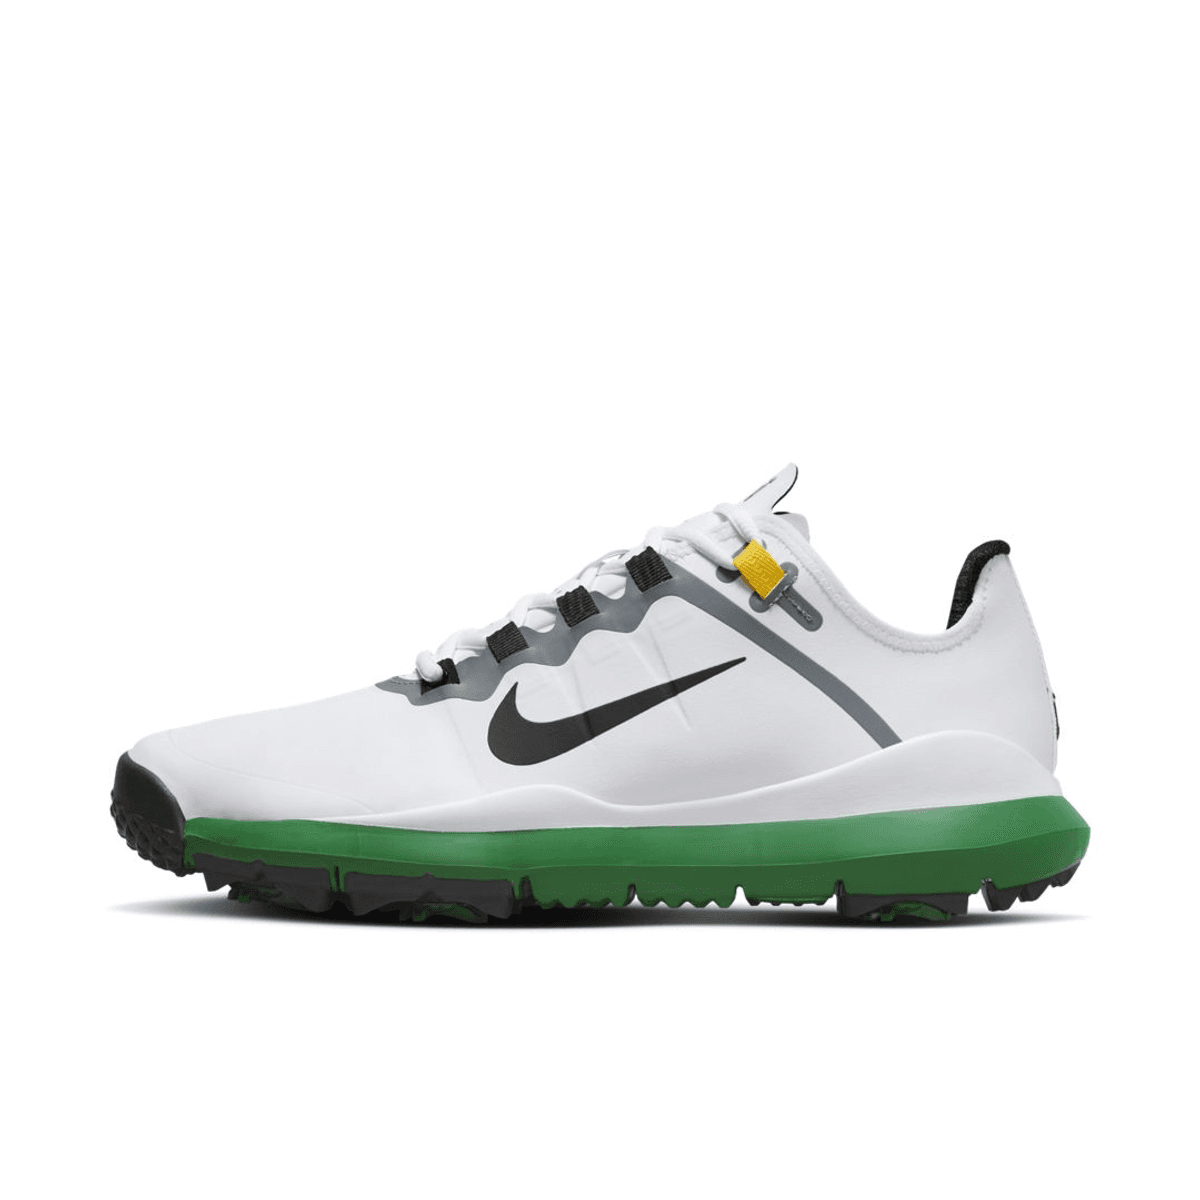 The Nike Tiger Woods ’13 “Masters” Releases December 8th